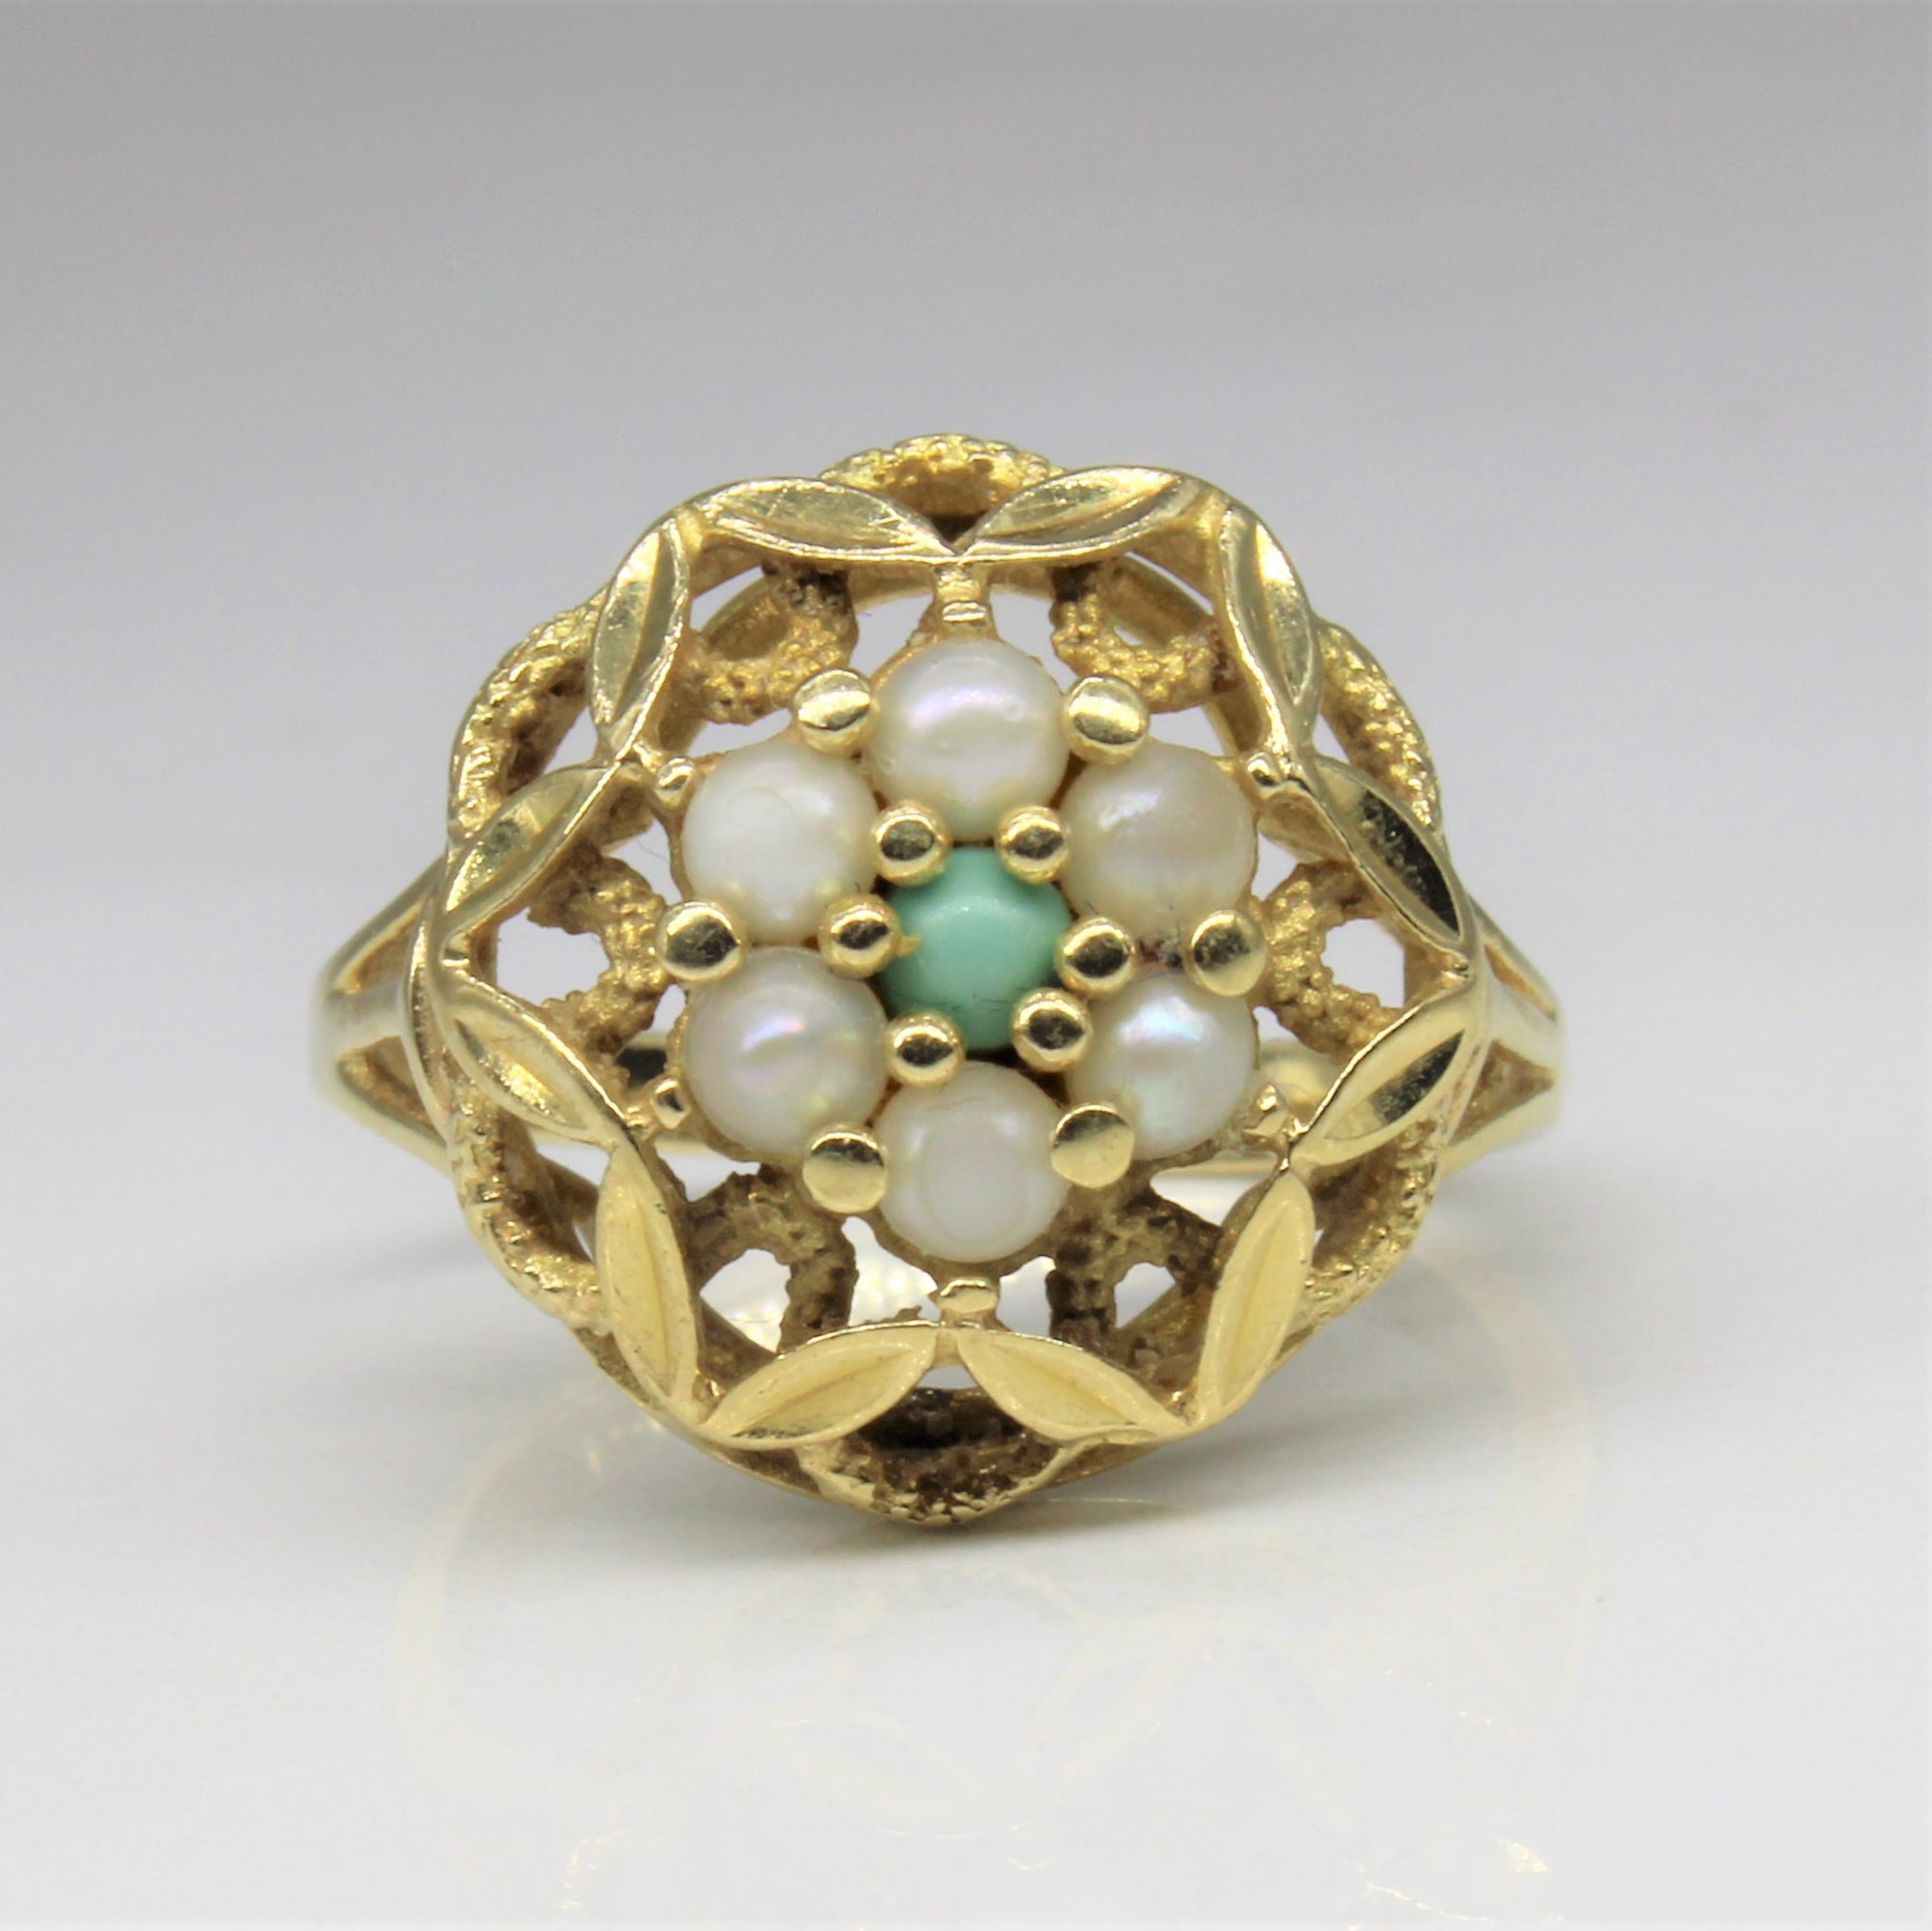 Birks' Turquoise & Pearl Cocktail Ring | 0.07ctw | SZ 4.5 |